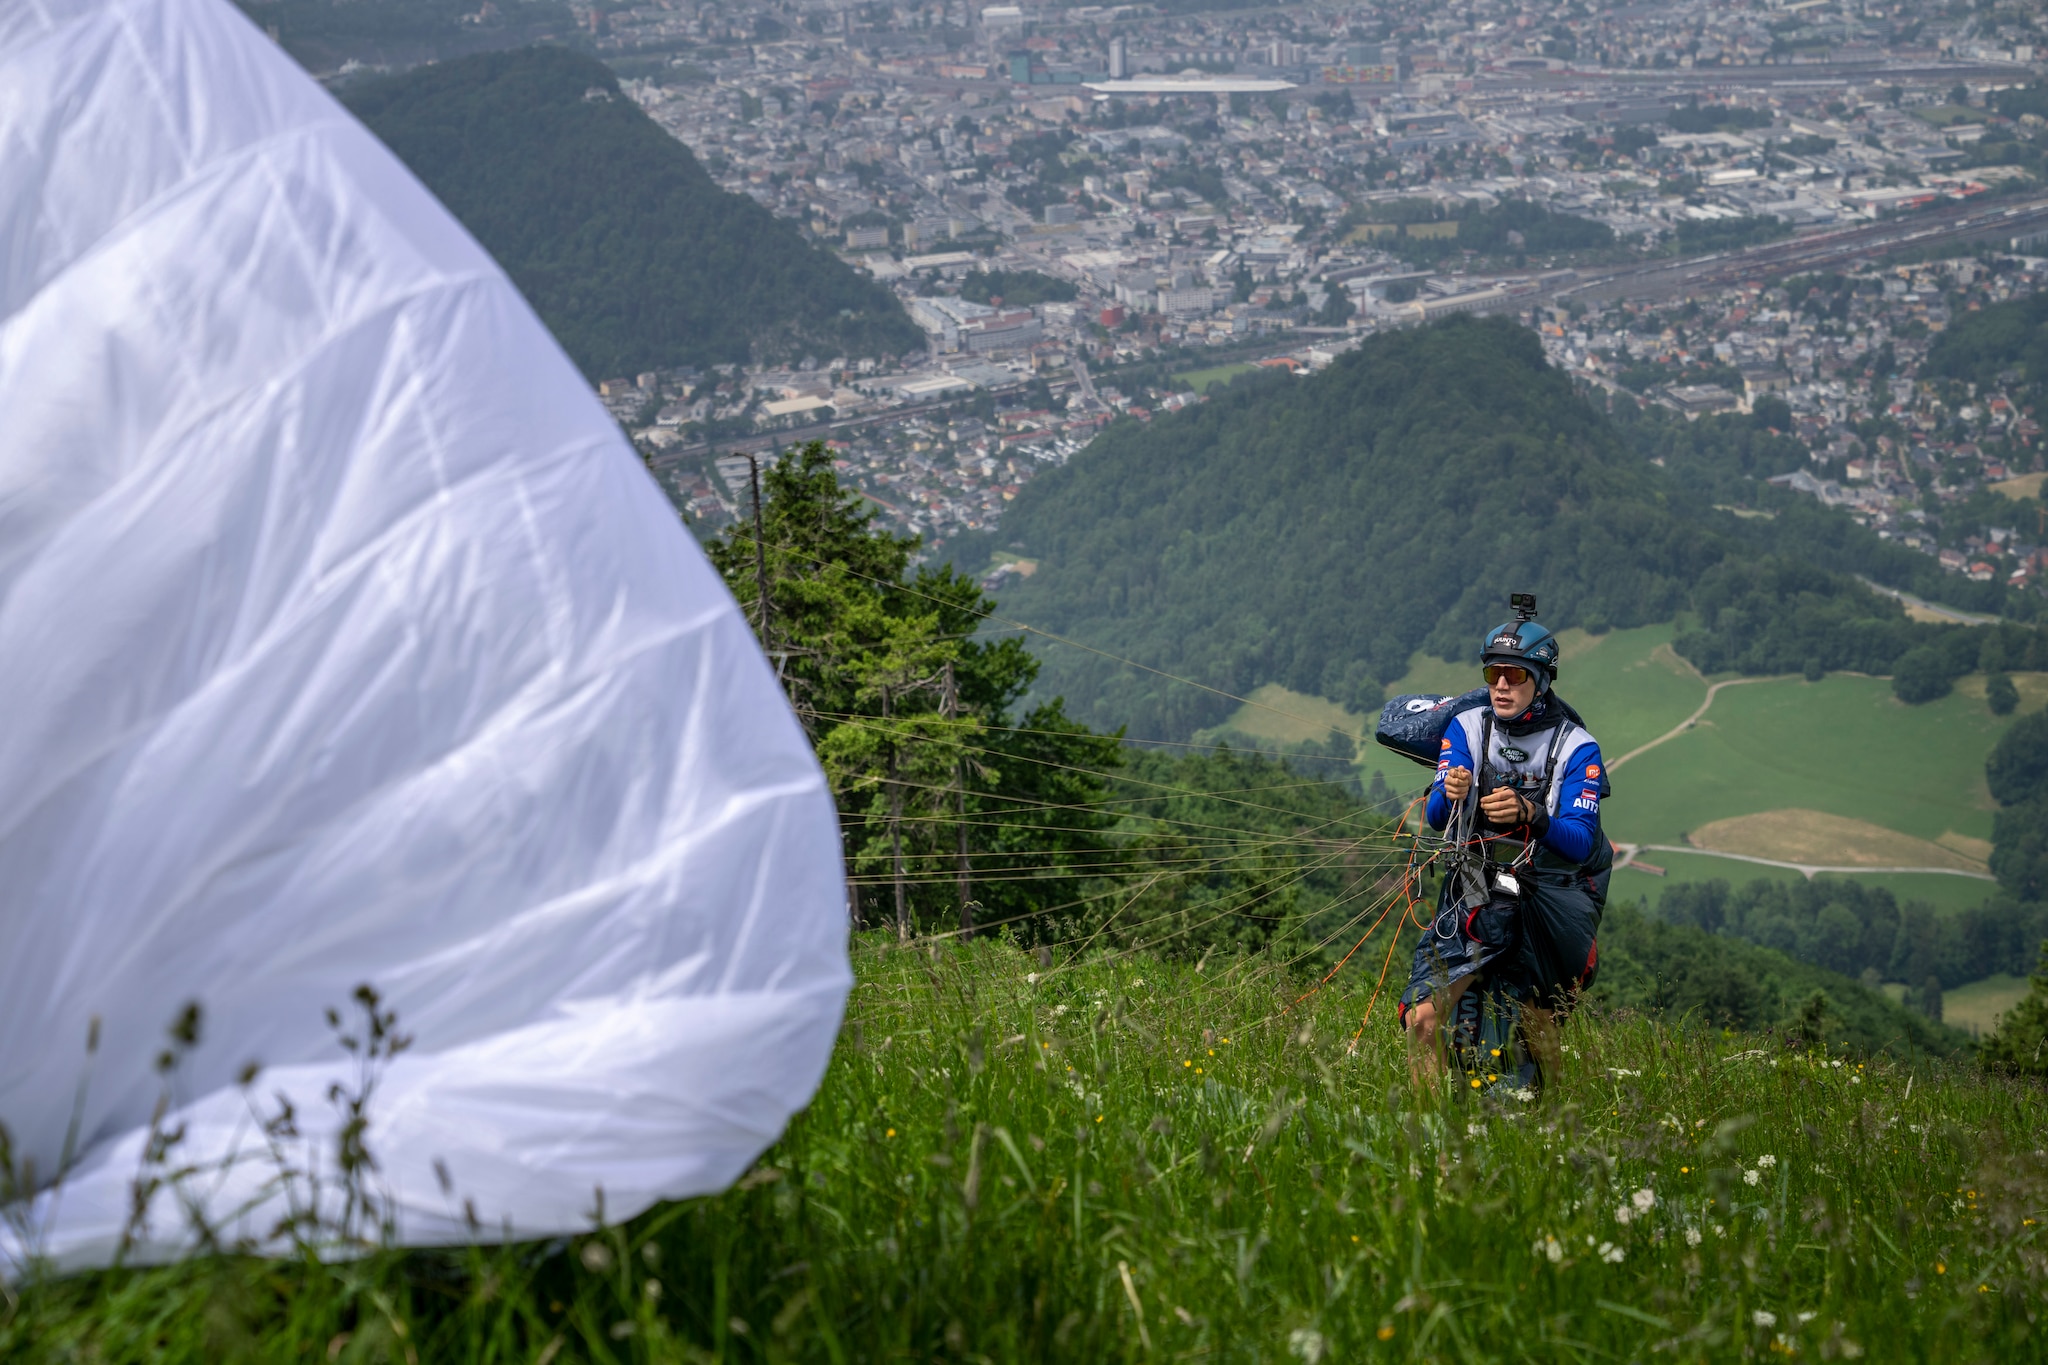 AUT3 performs during the Red Bull X-Alps in Salzburg, Austria on June 20, 2021.